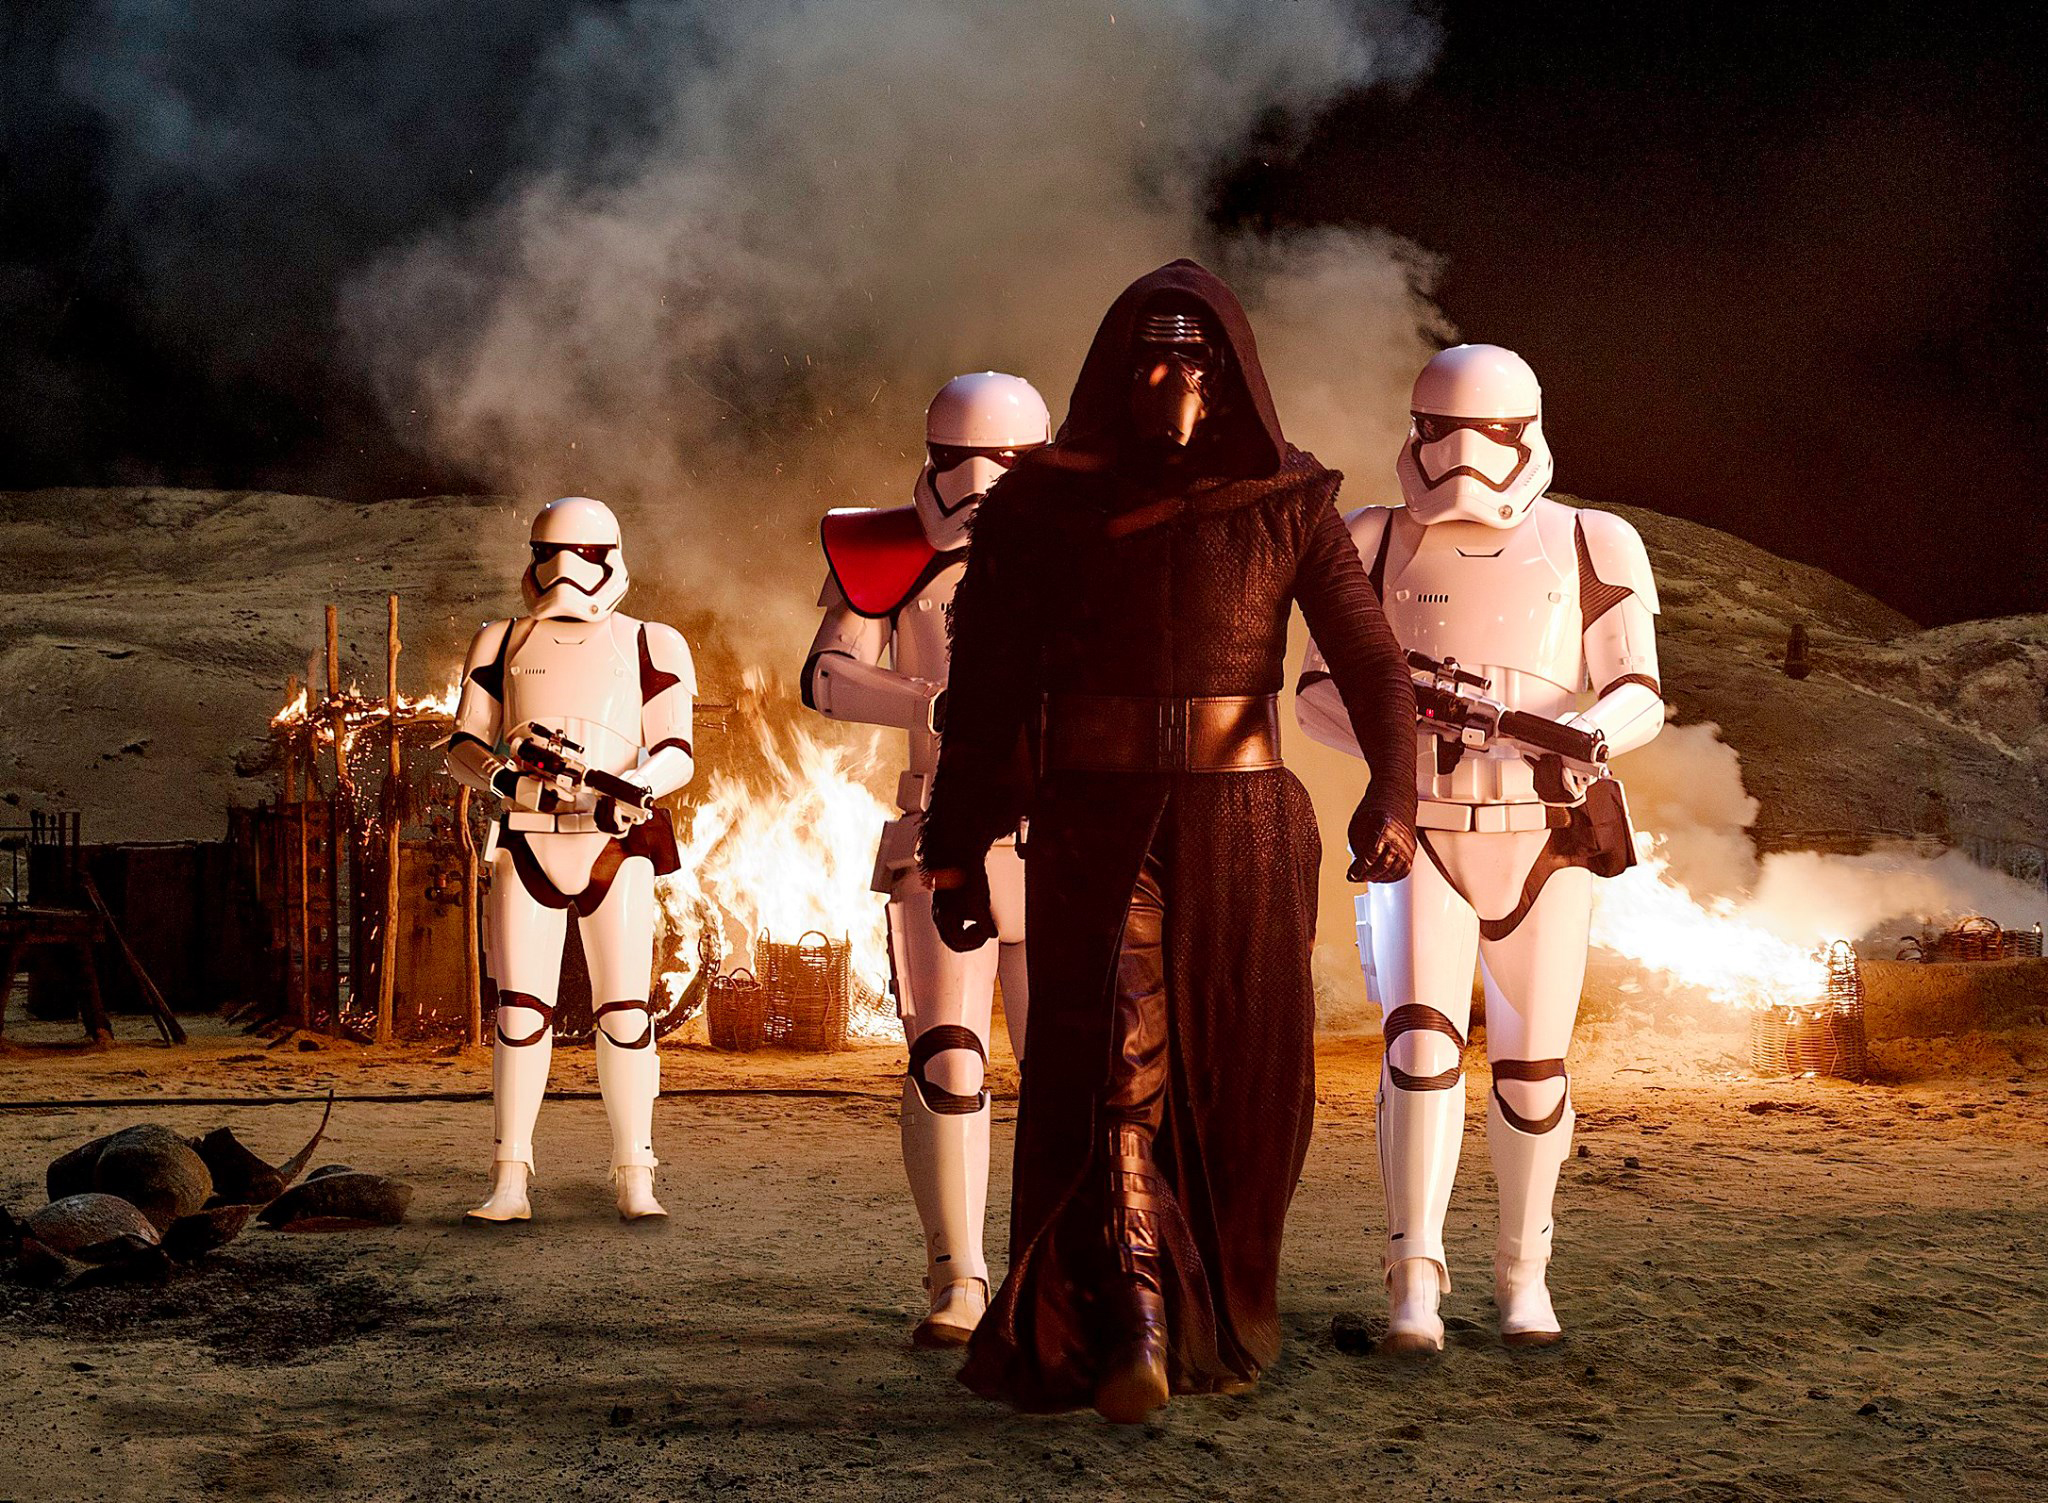 Kylo Ren (Adam Driver) is a villain with an engaging, youthful uncertainty about his path.